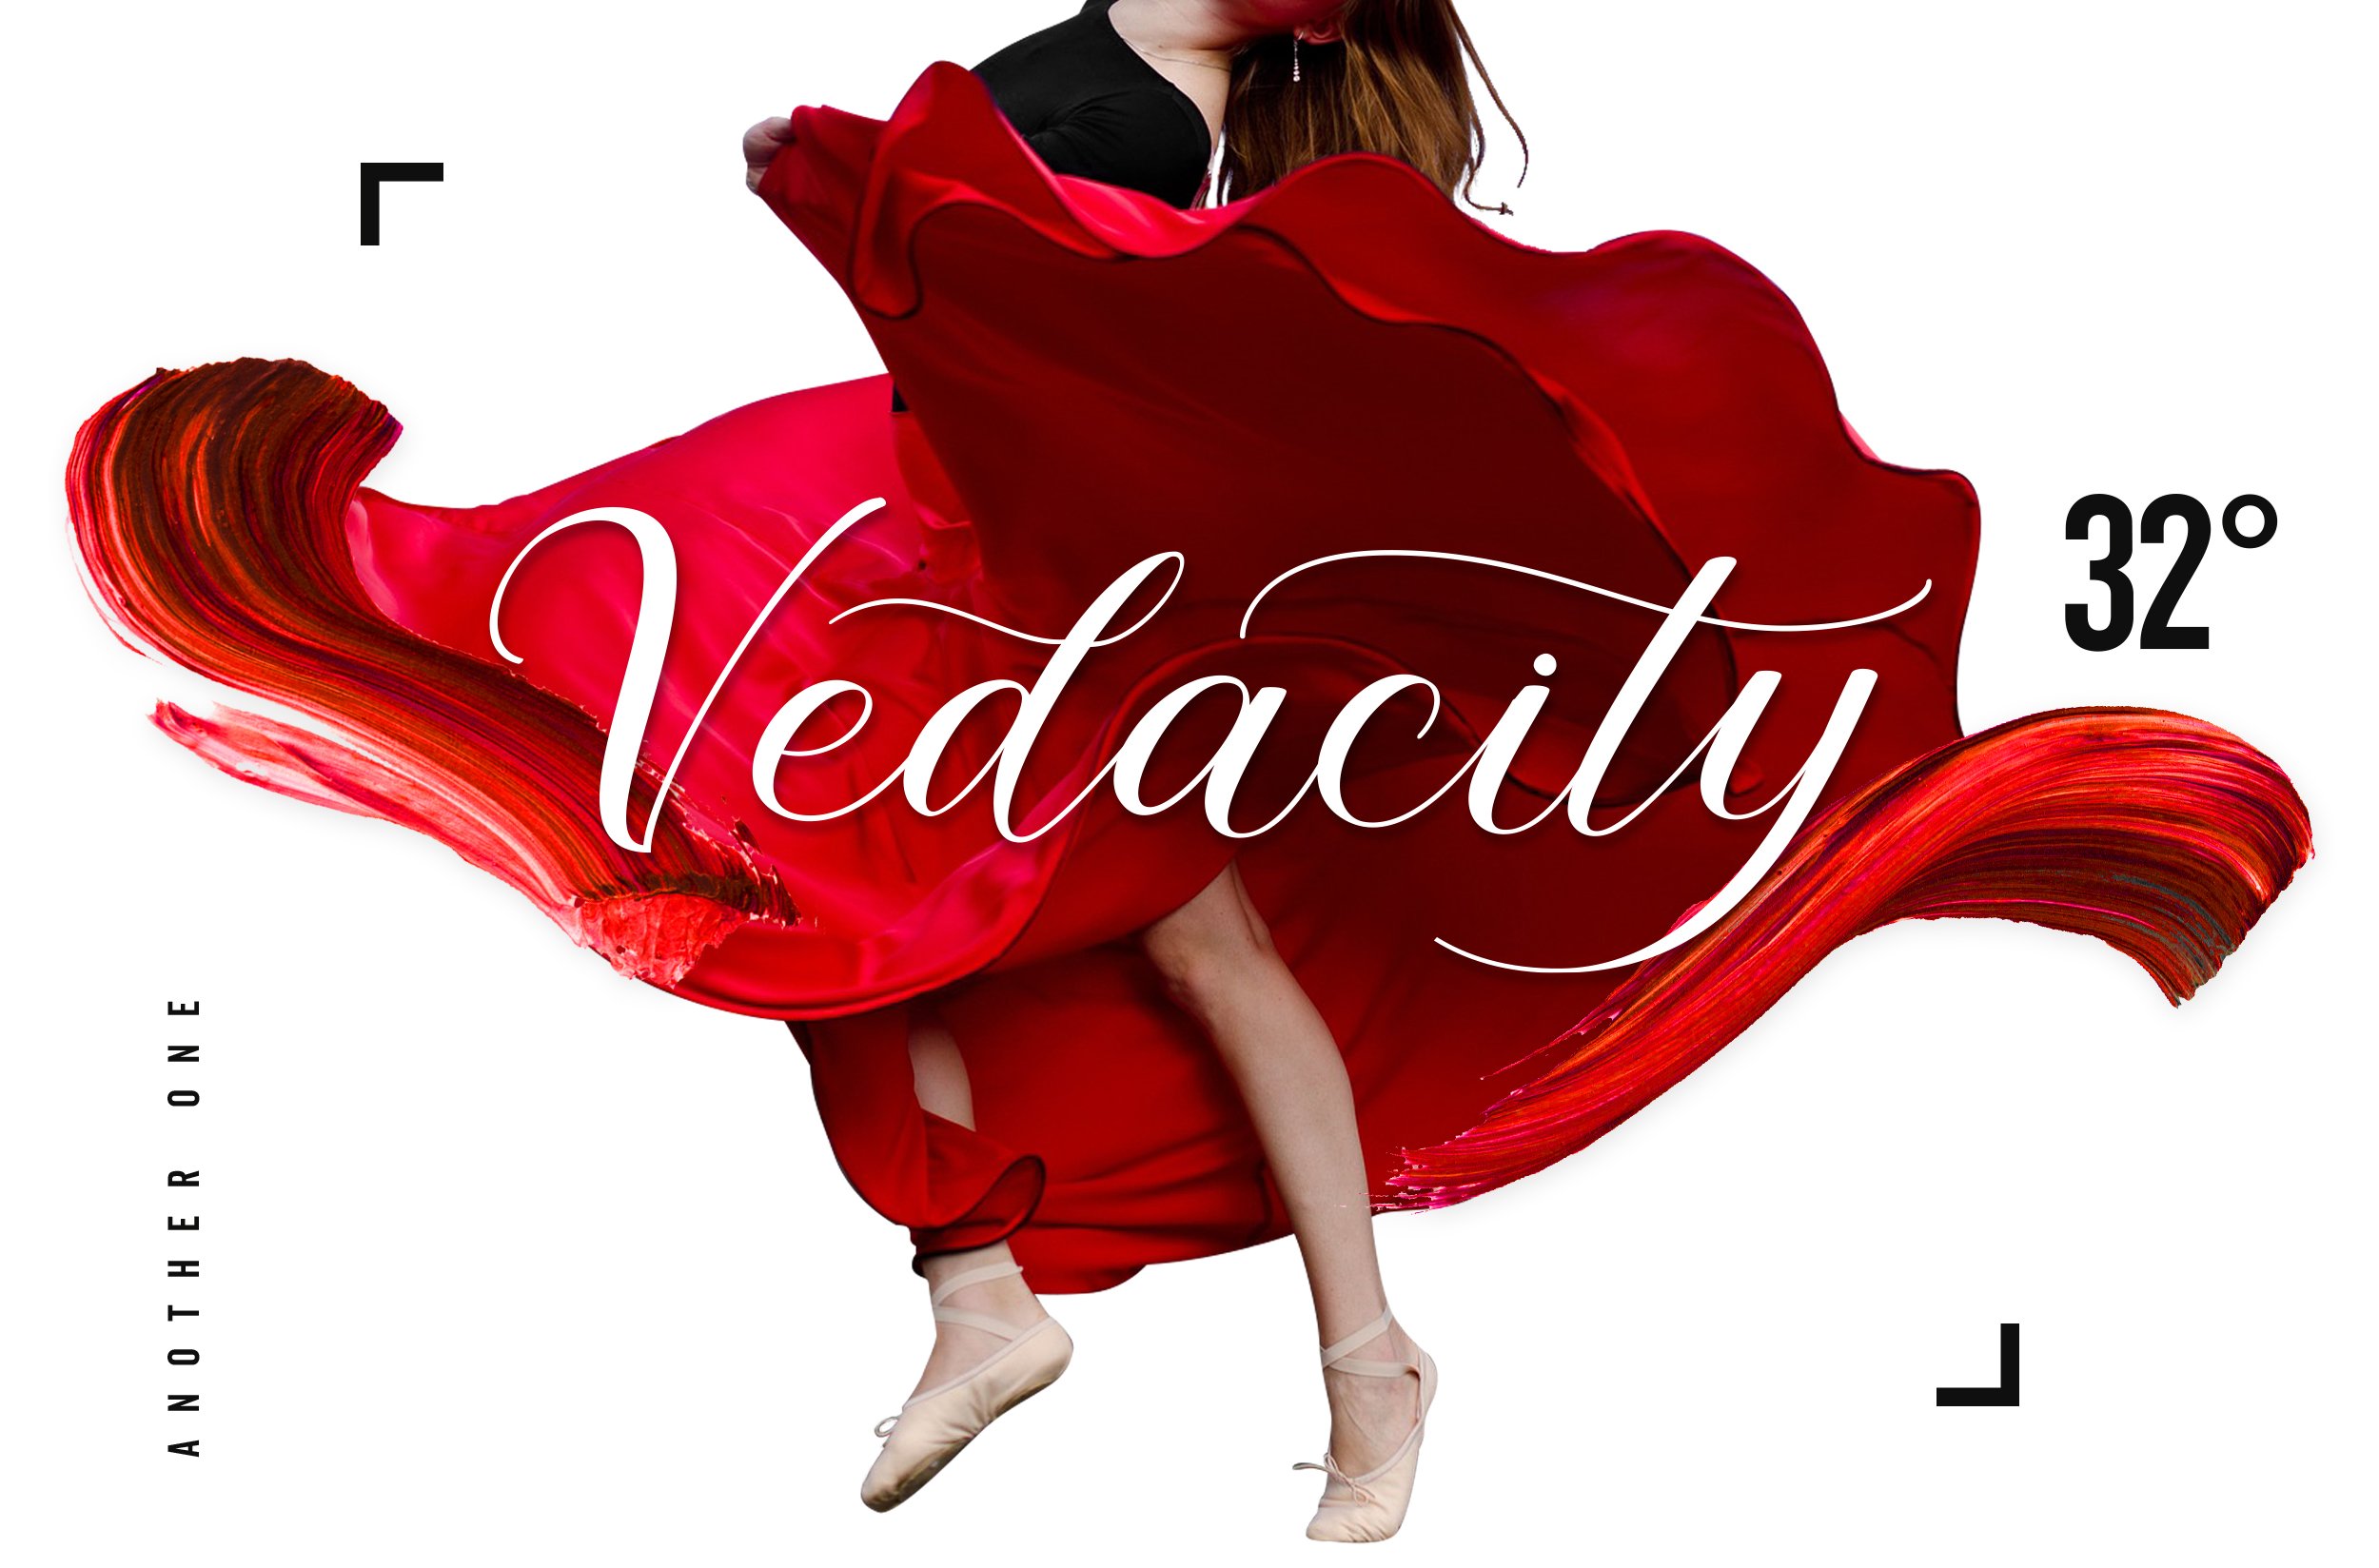 Vedacity - A Beautiful Script cover image.